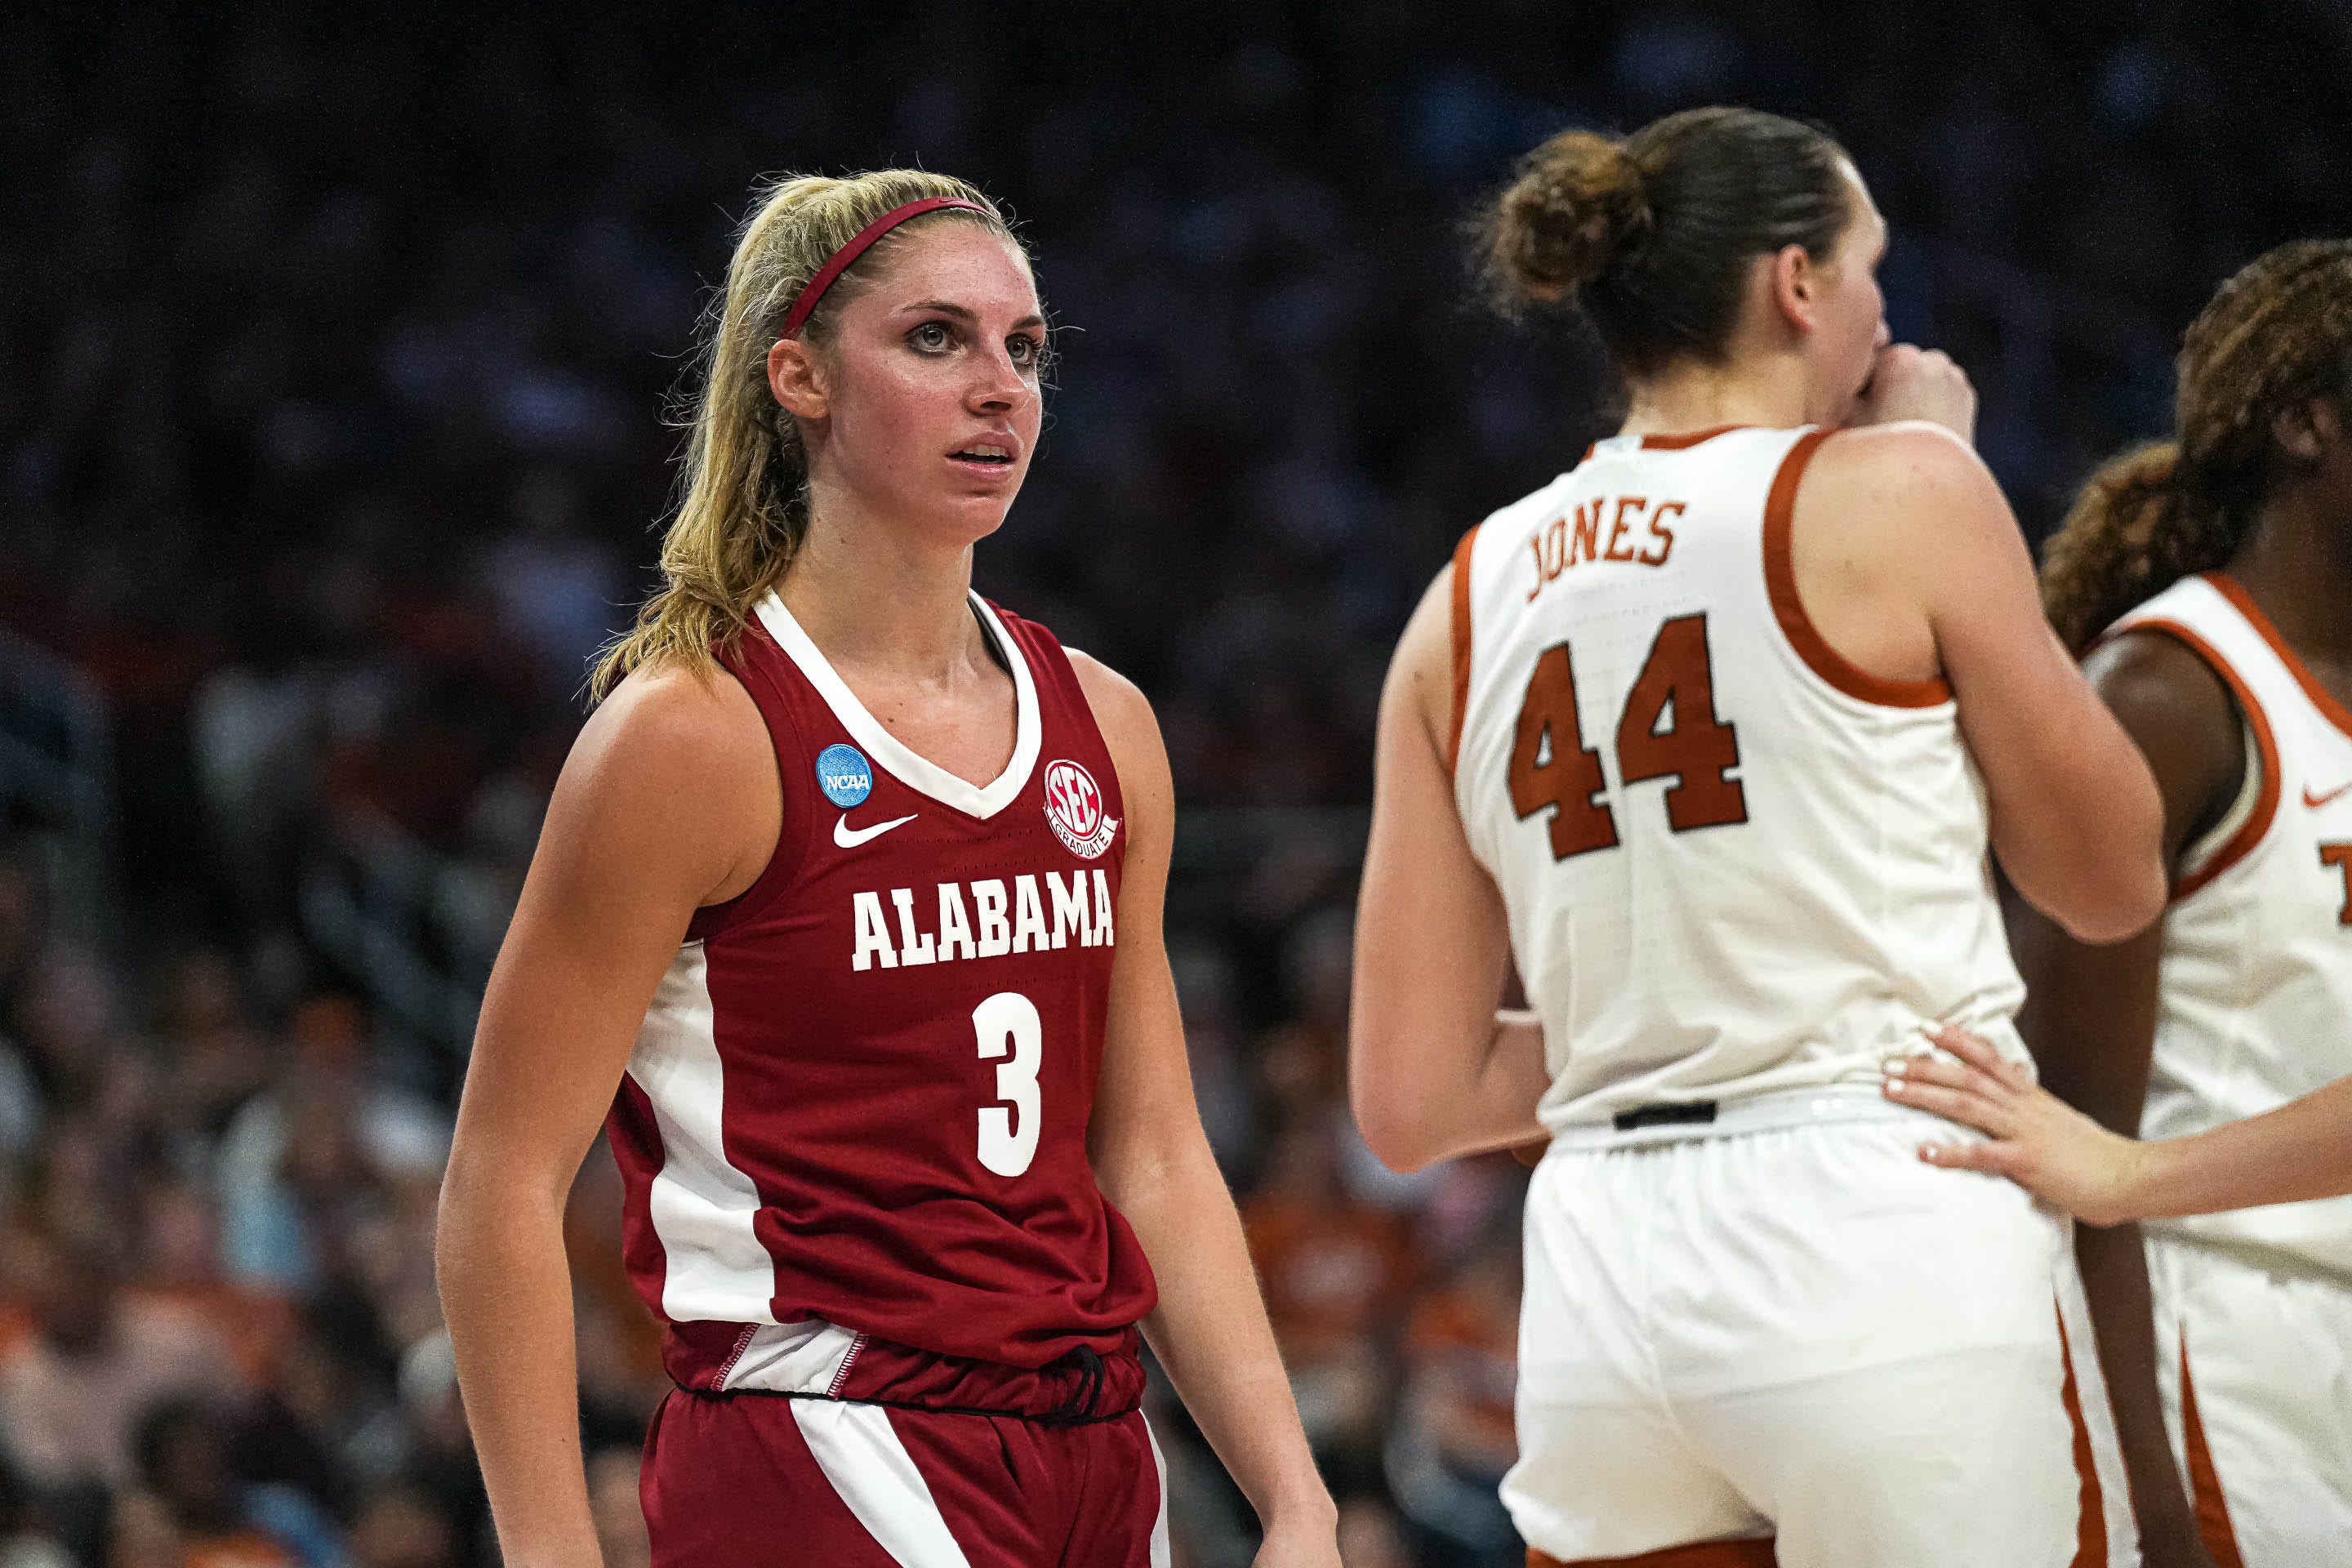 Alabama guard Sarah Barker (3) looks to the sideline during the NCAA playoff game against the Texas Longhorns at the Moody Center on Sunday, Mar. 23, 2024 in Austin.